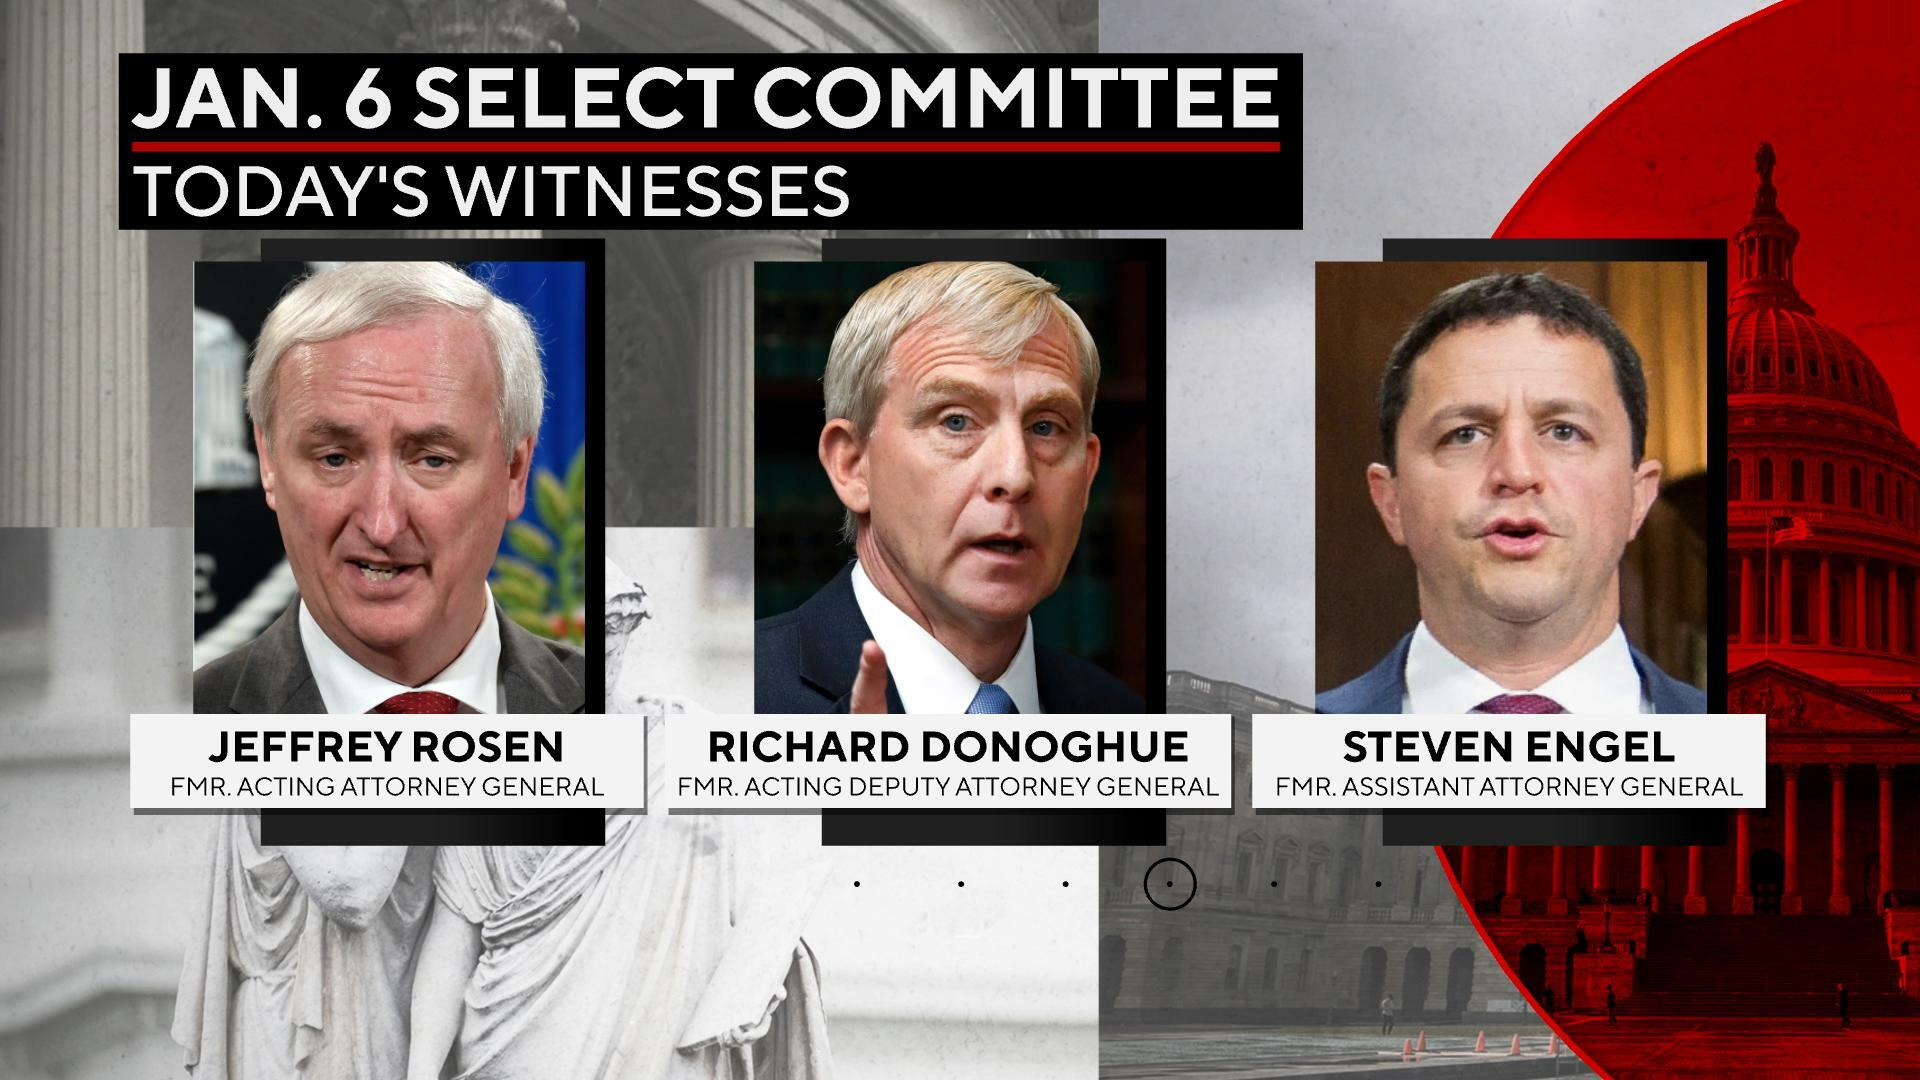 Watch CBS Mornings: Day 5 of the Jan. 6 committee hearings - Full show on  CBS